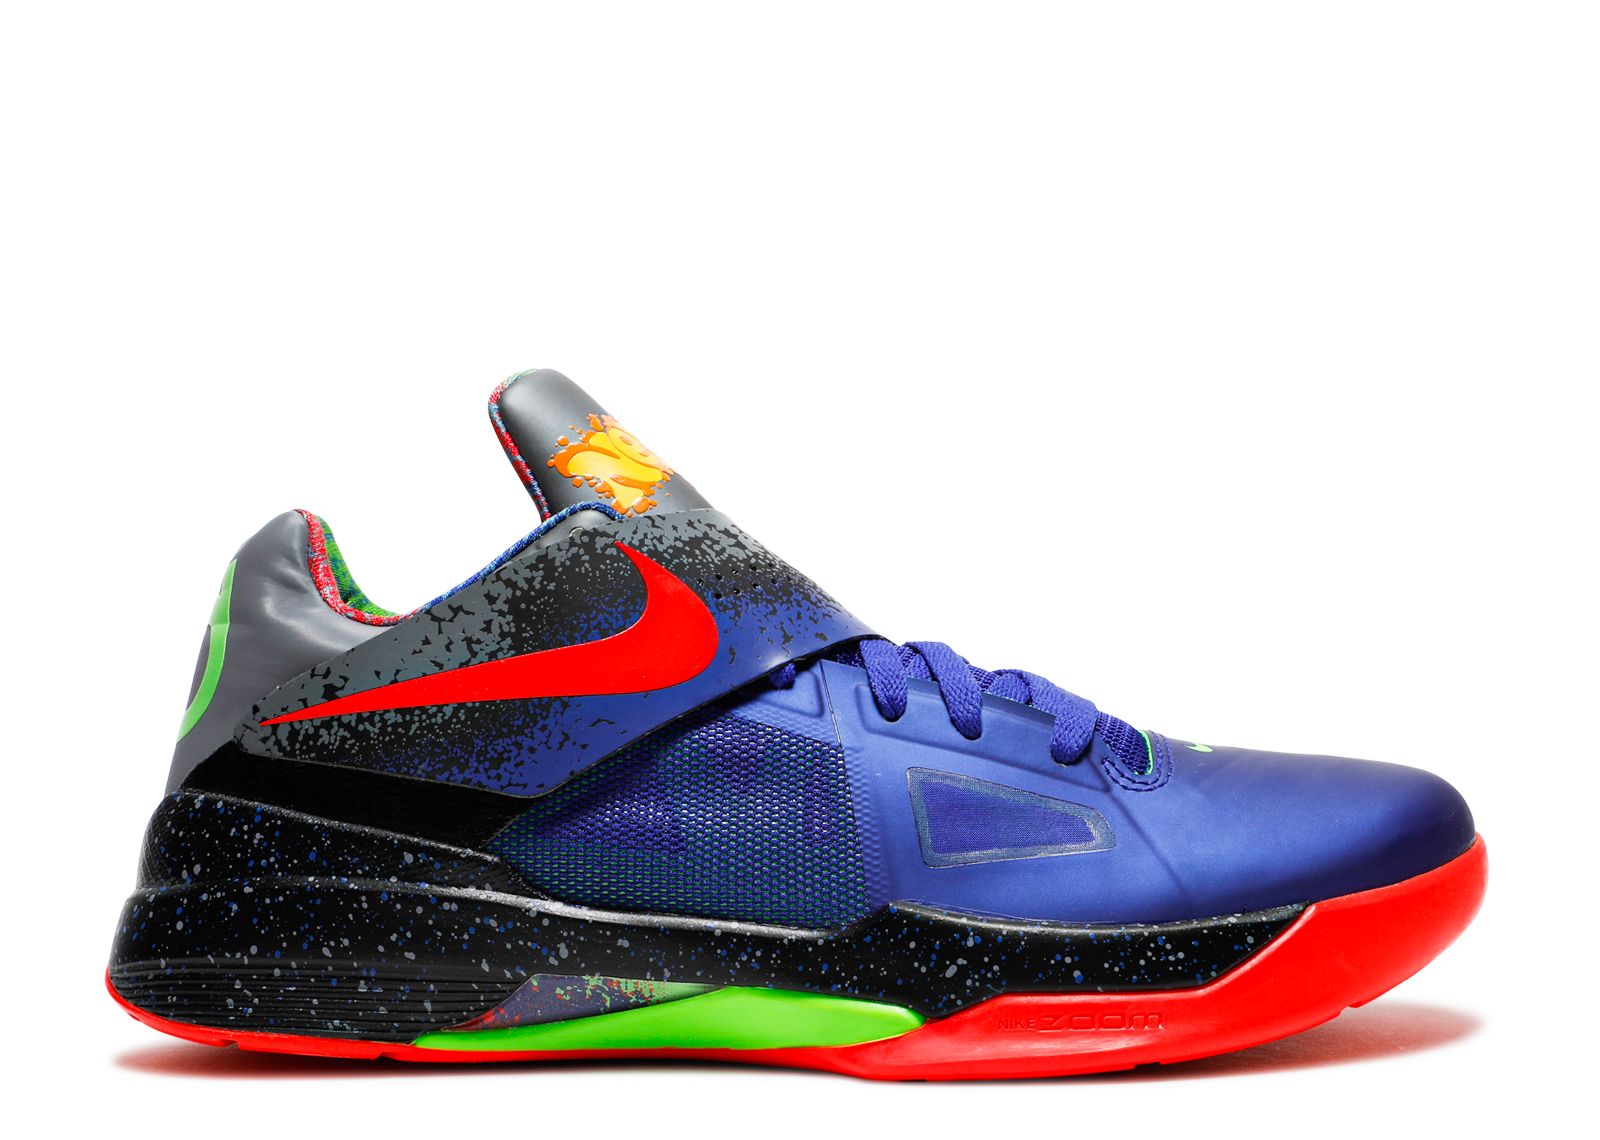 kd 4 elite - 64% OFF - Free delivery 